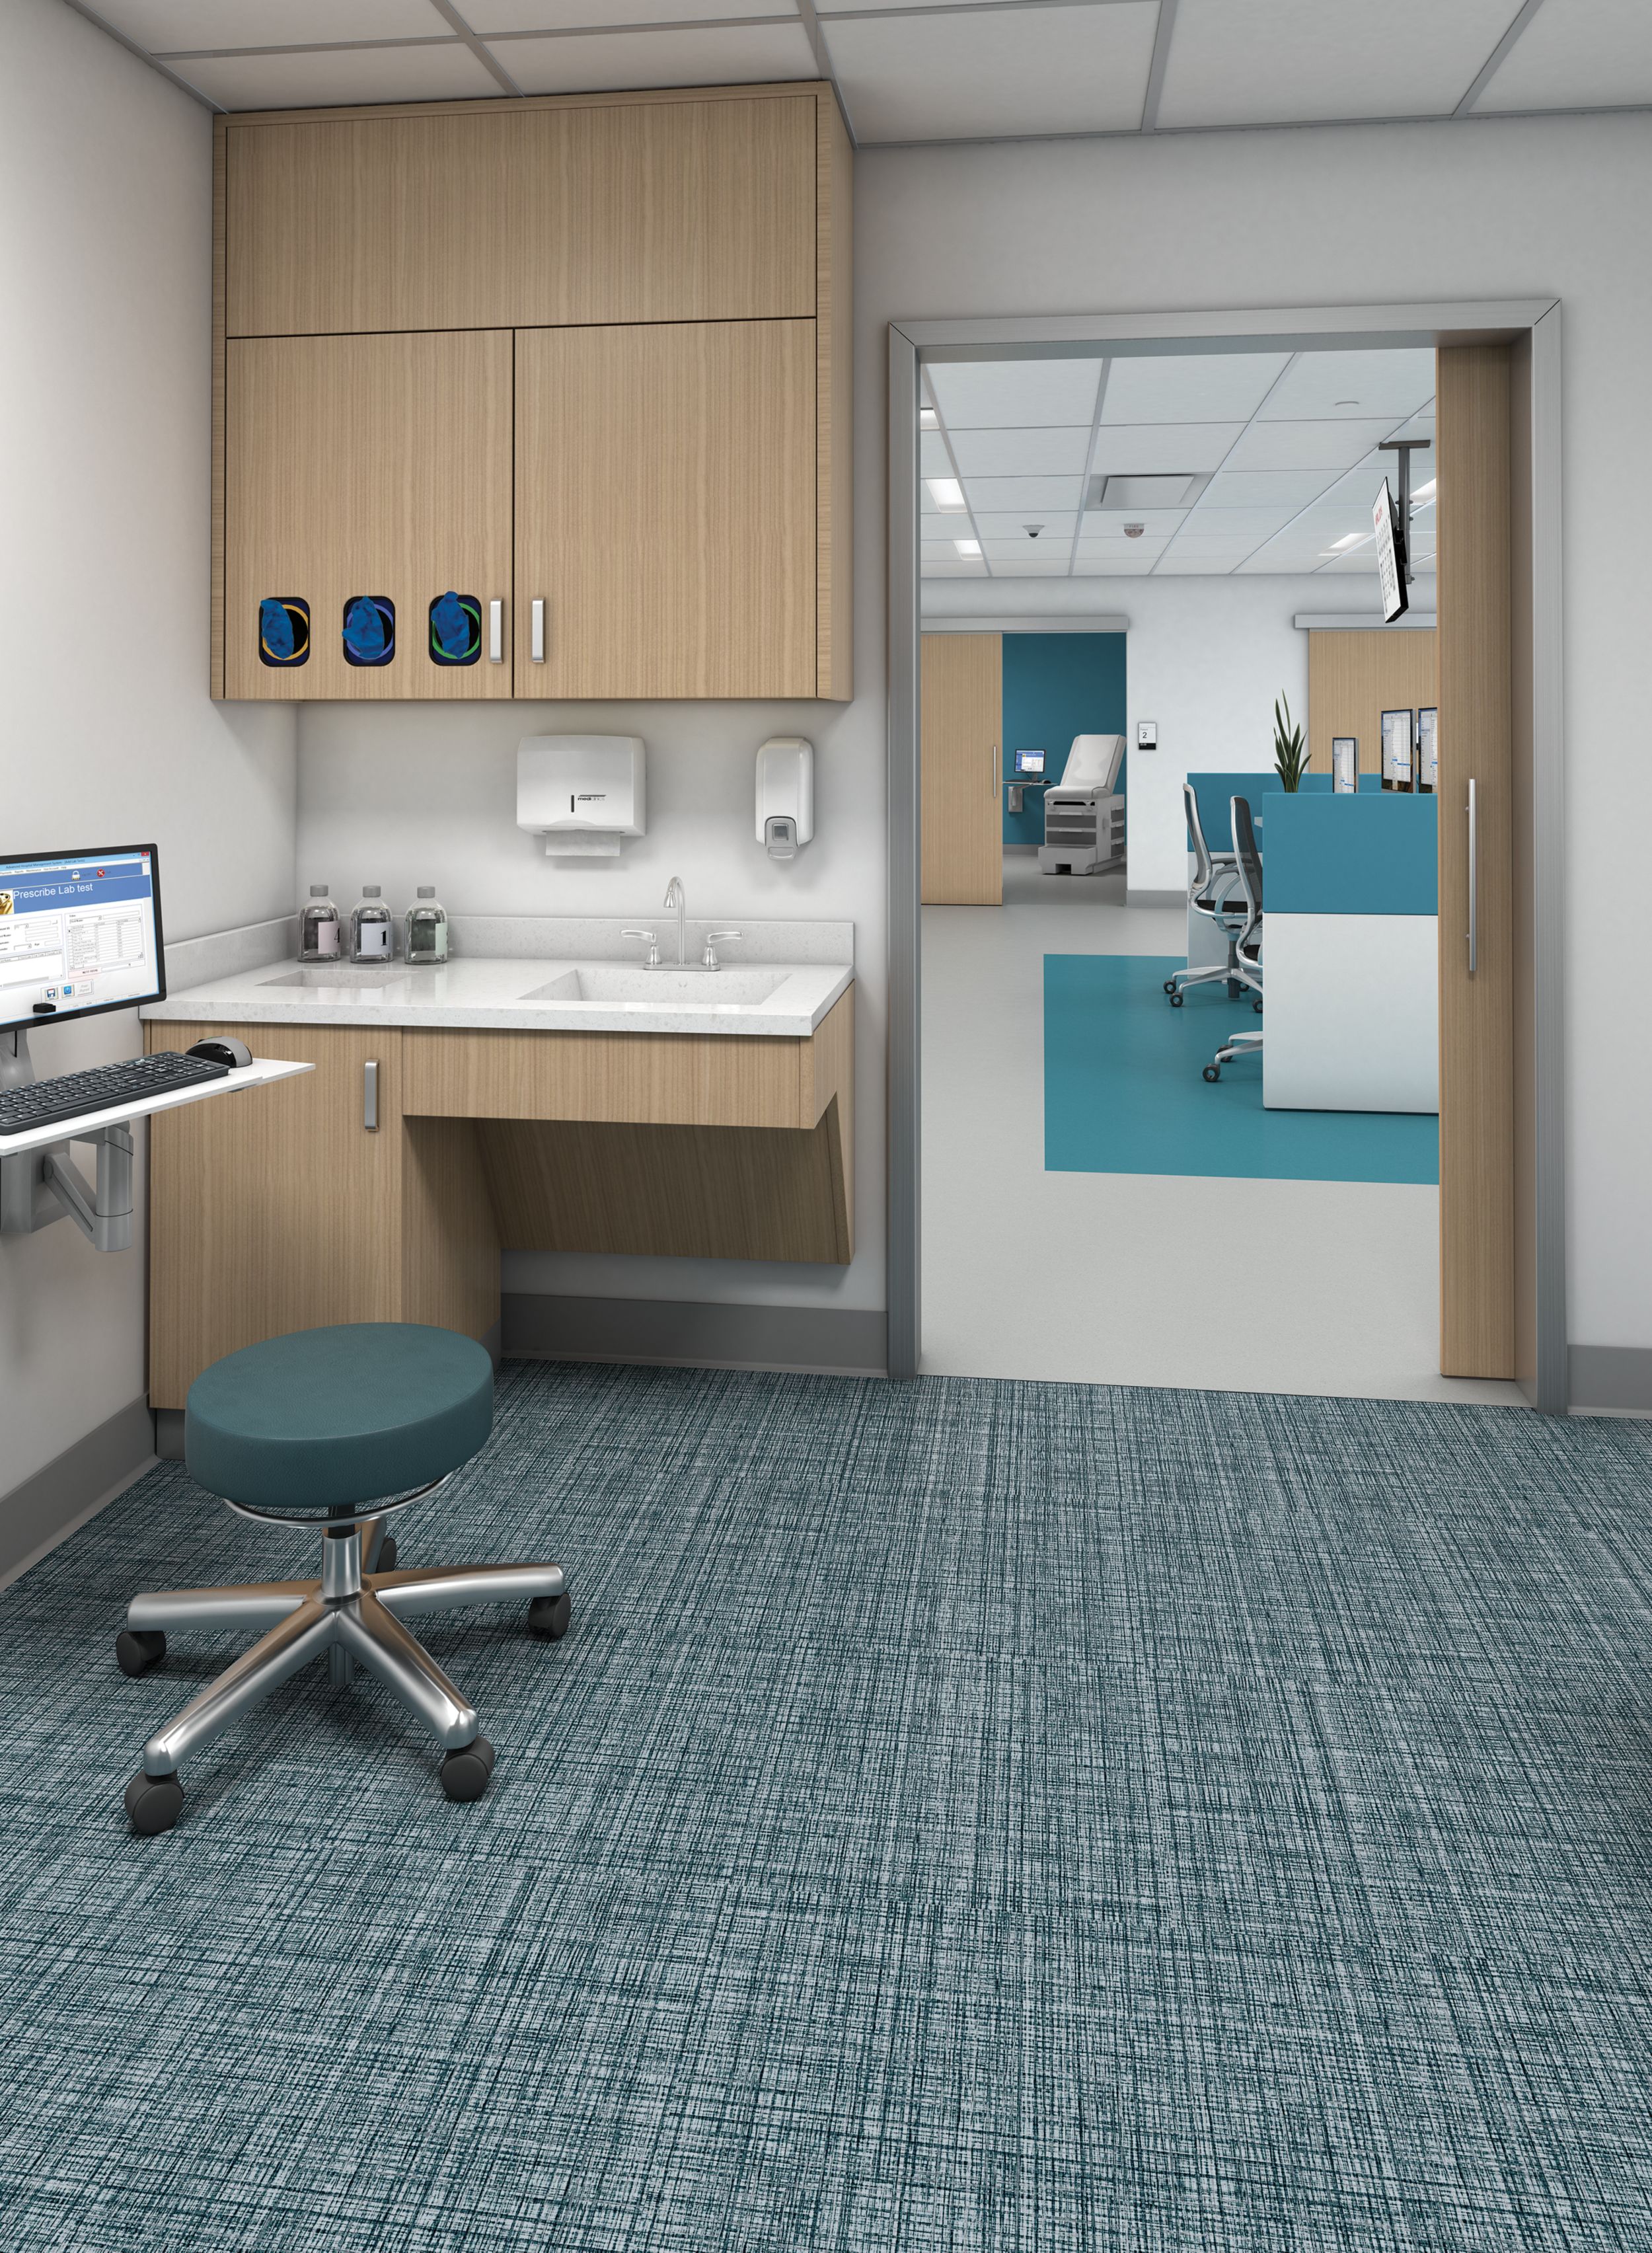 Interface Native Fabric LVT in exam room with nora by Interface sentica rubber flooring in outer area imagen número 8